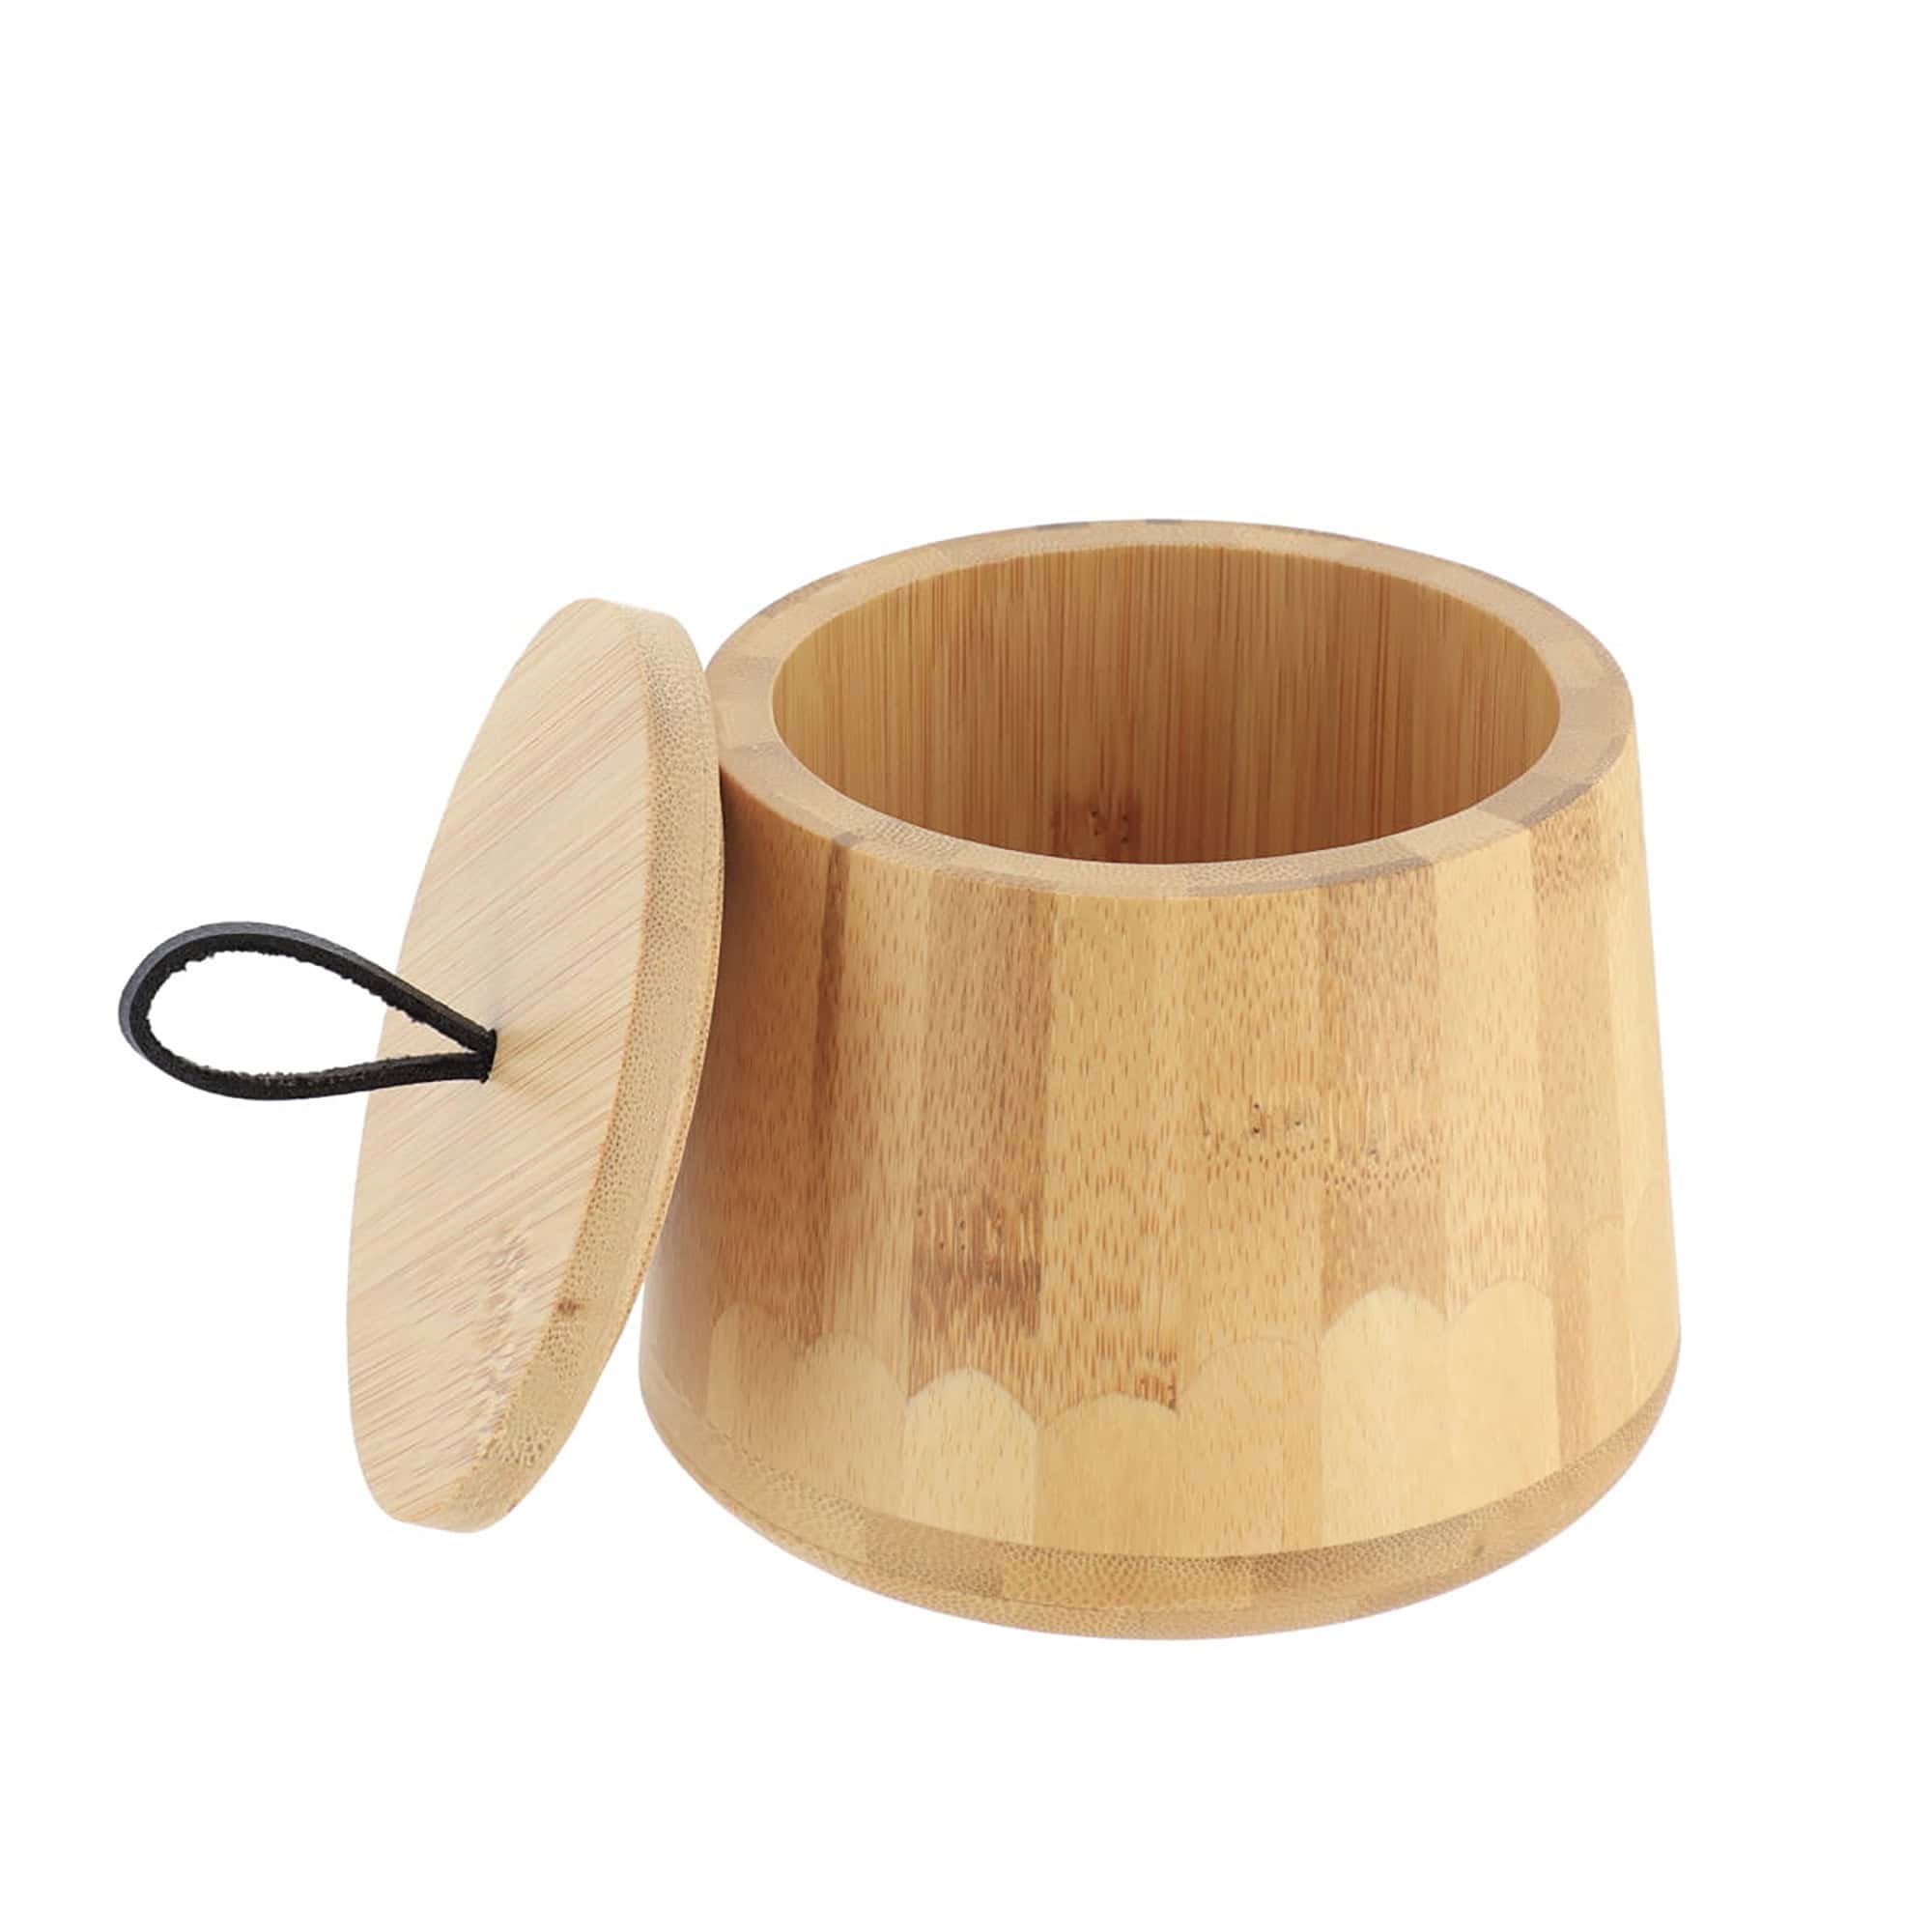 Cotton ball holder in natural bamboo